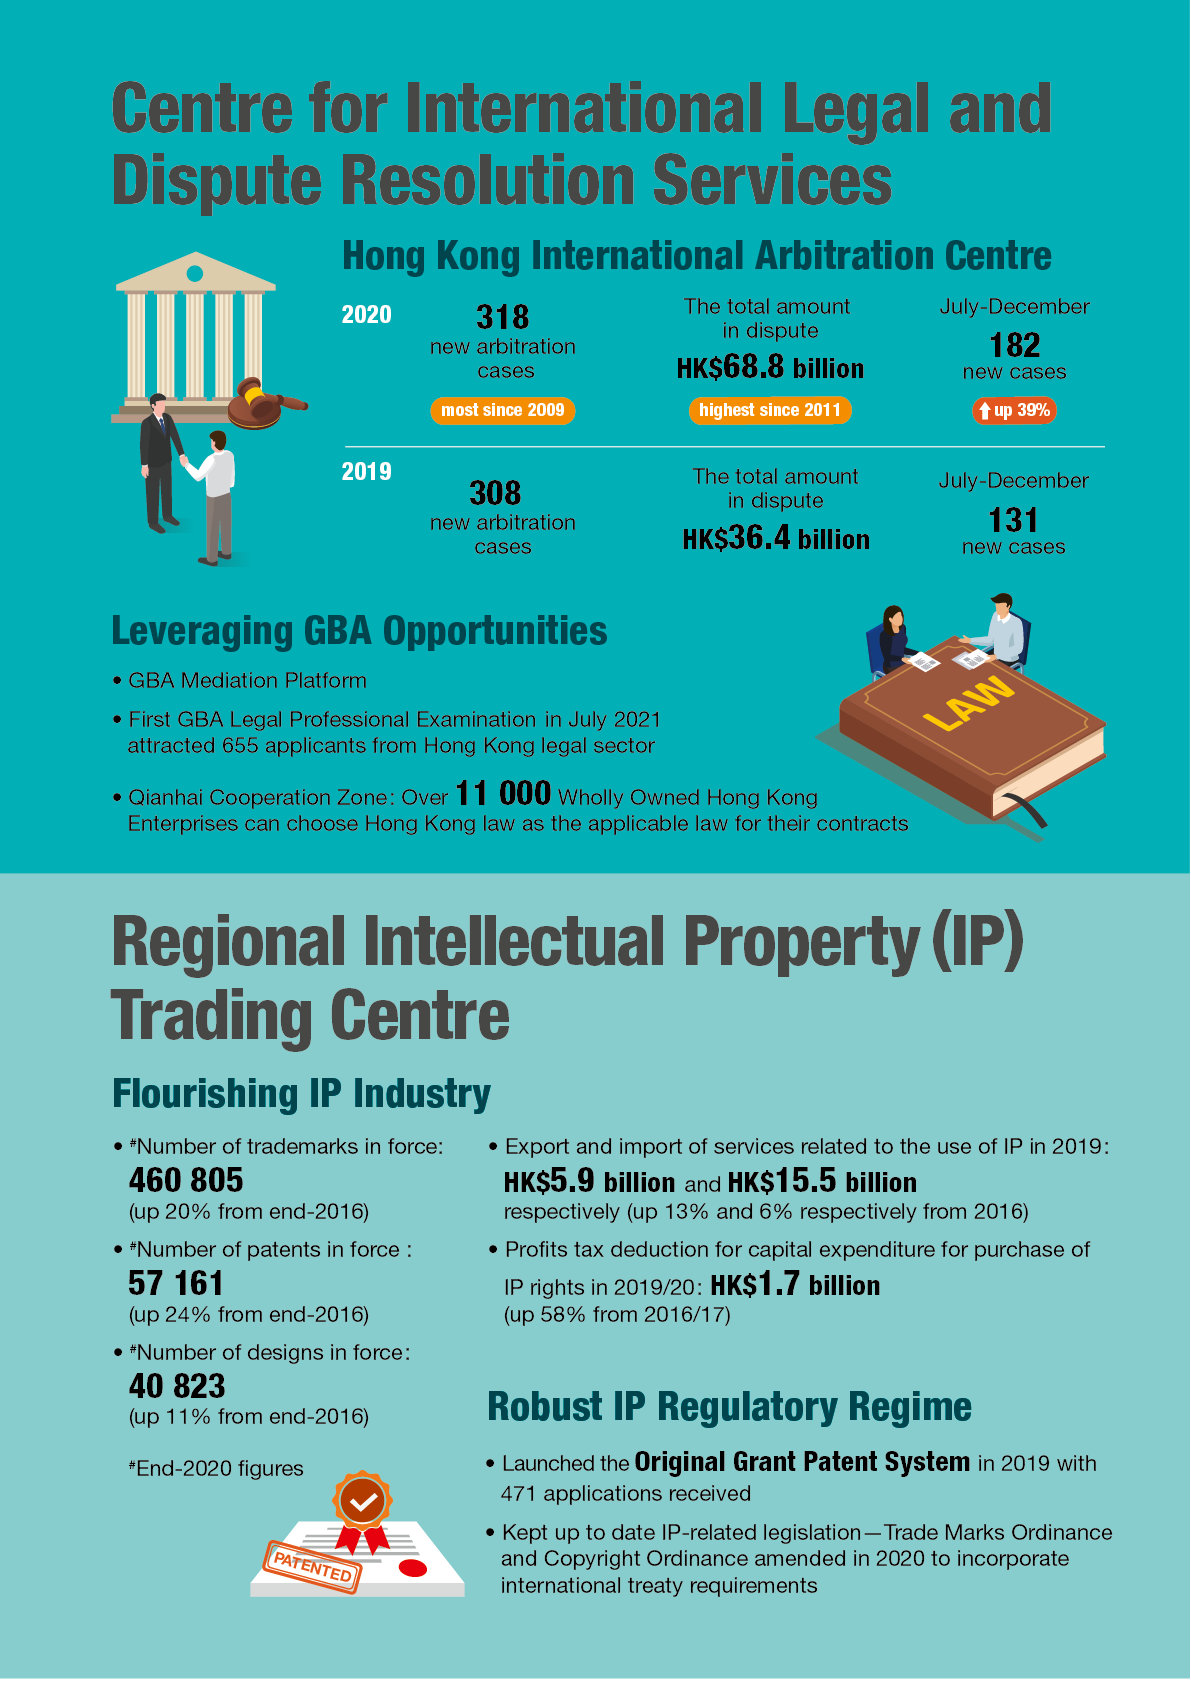 Centre for International Legal and Dispute Resolution Services,  Regional Interllectual Property (IP) Trading Centre